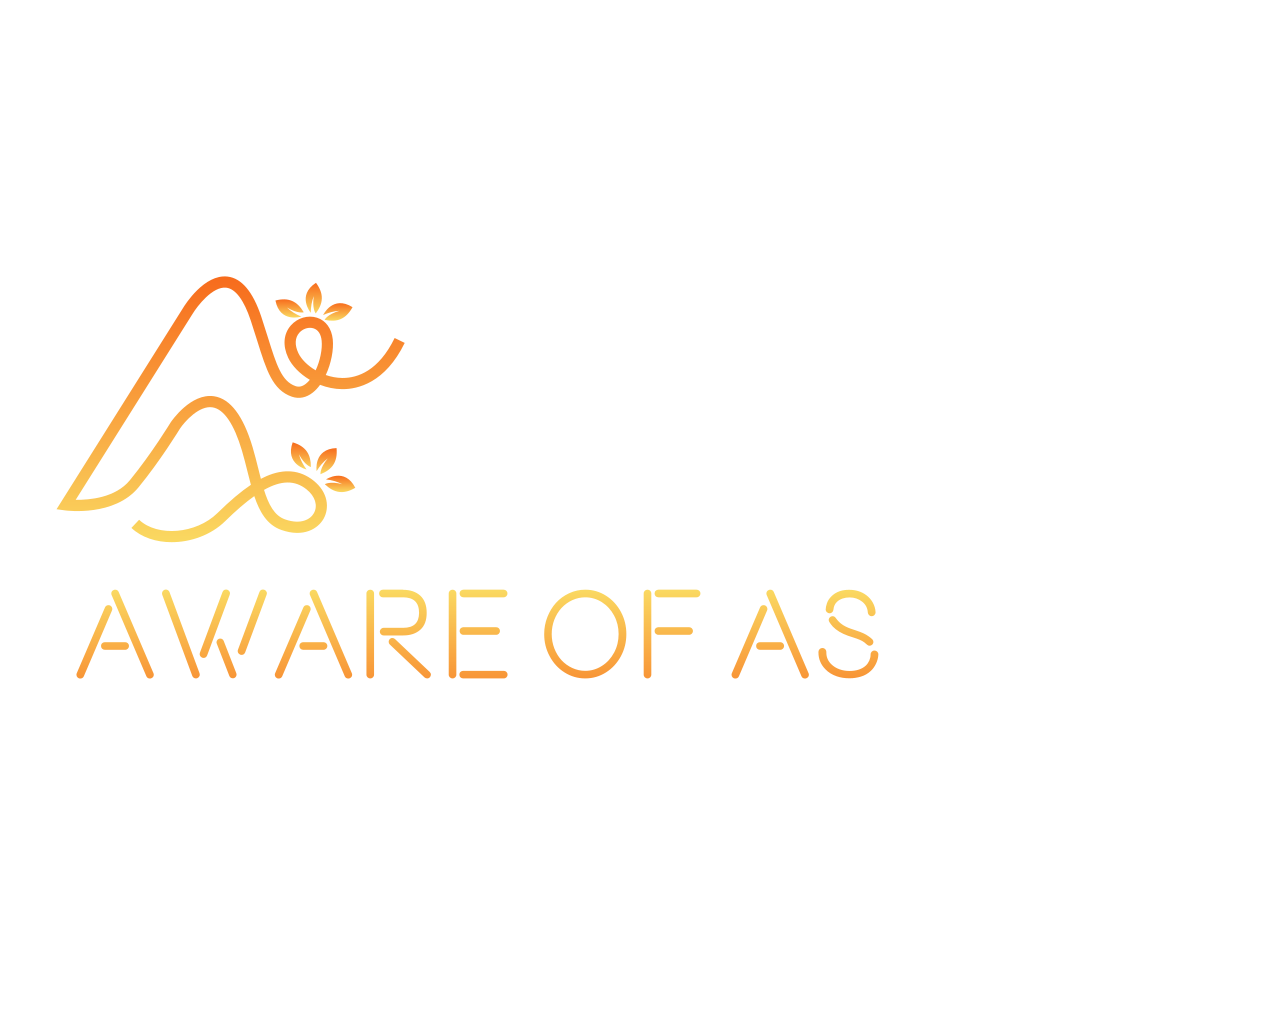 Aware of AS